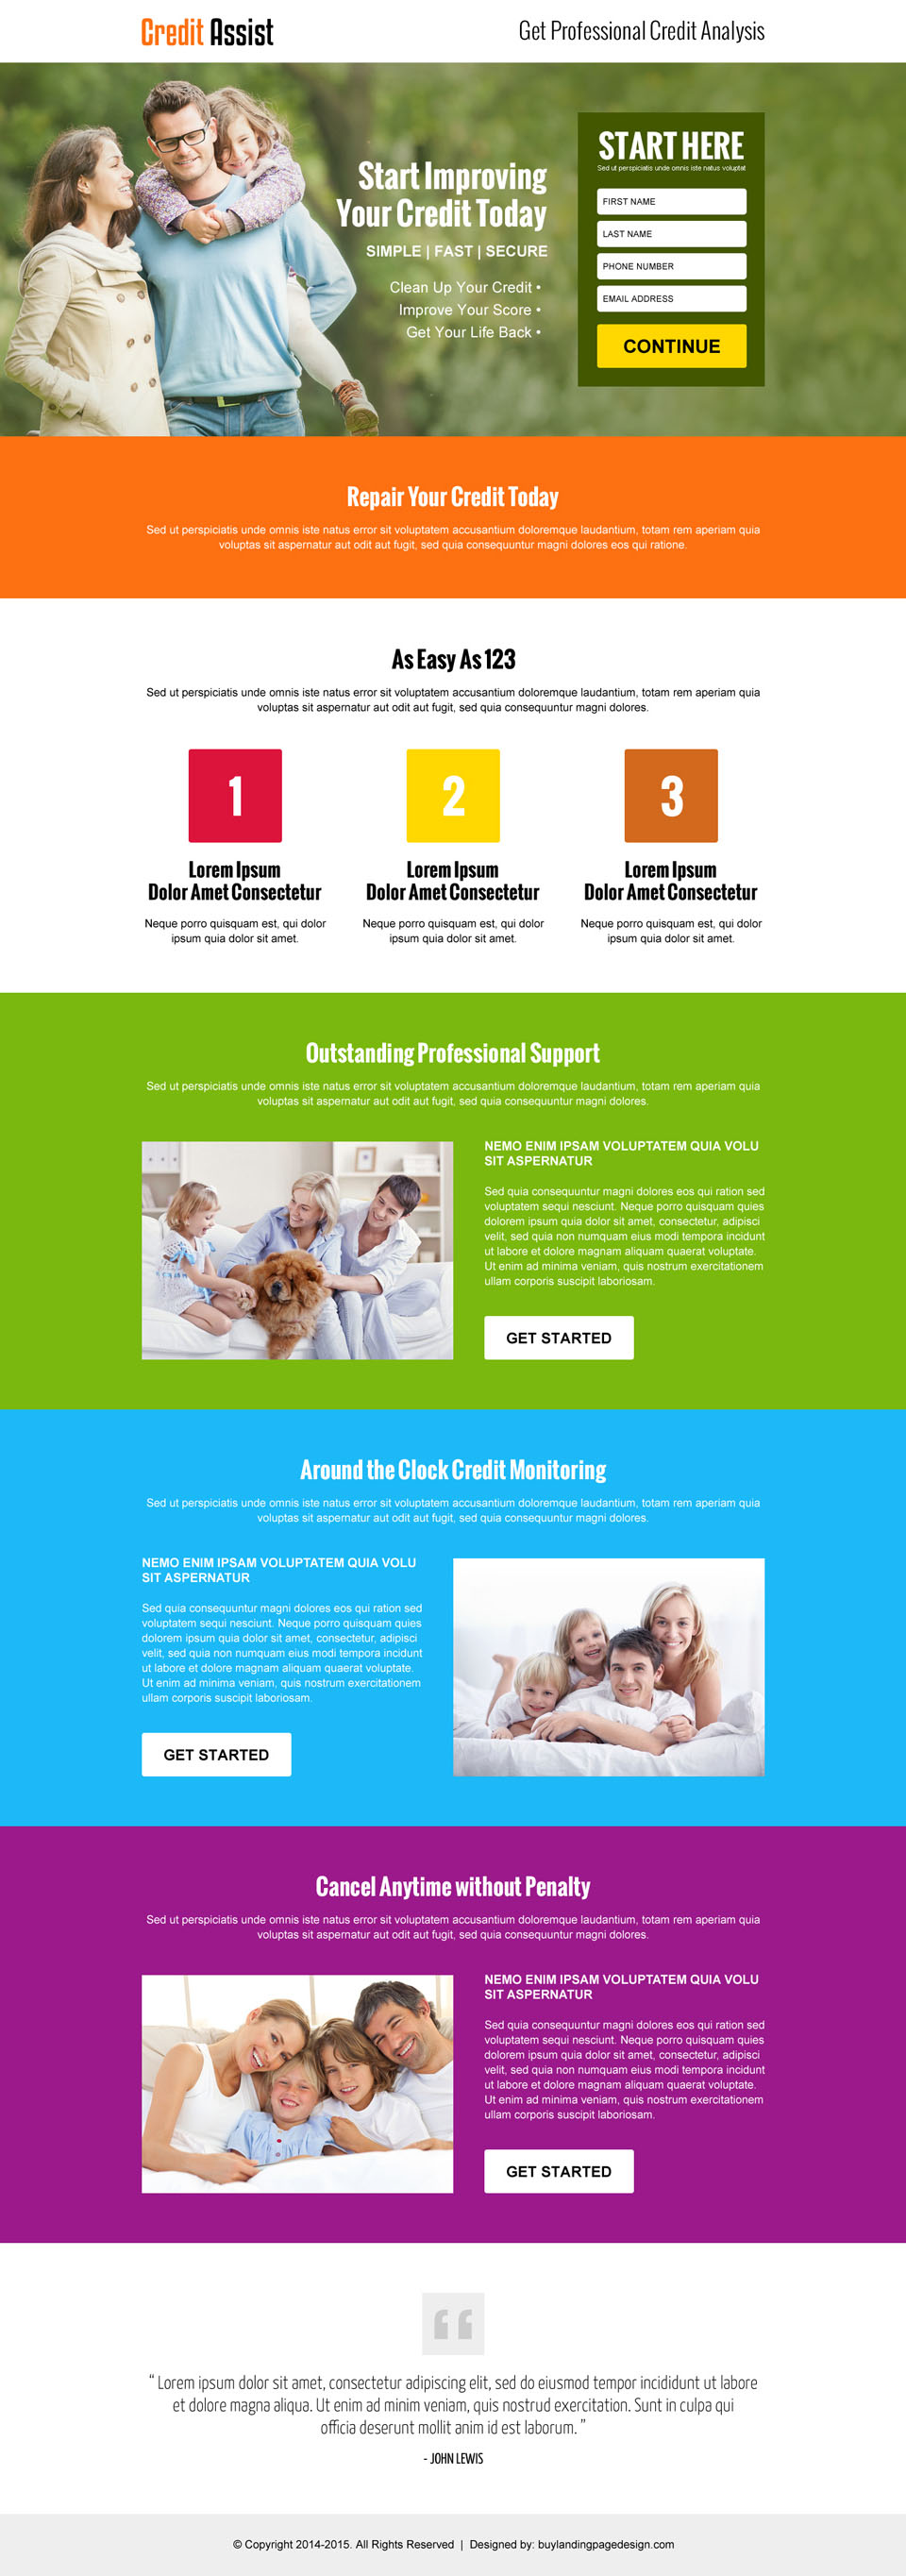 credit-analysis-service-lead-genration-best-converting-responsive-landing-page-design-template-008